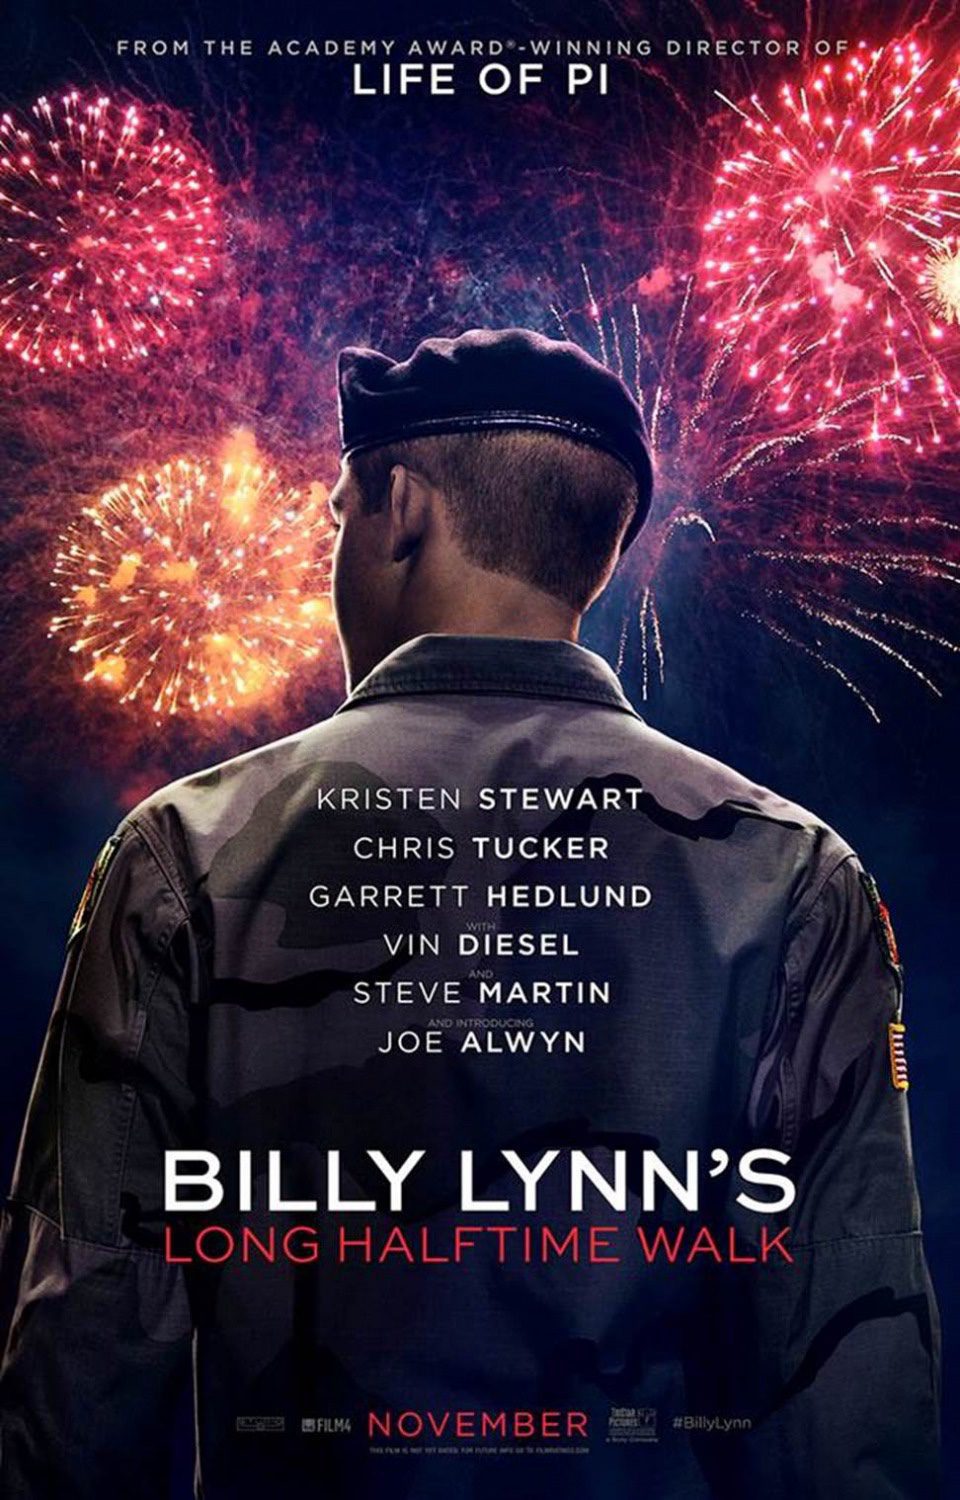 EE.UU poster for Billy Lynn's Long Halftime Walk